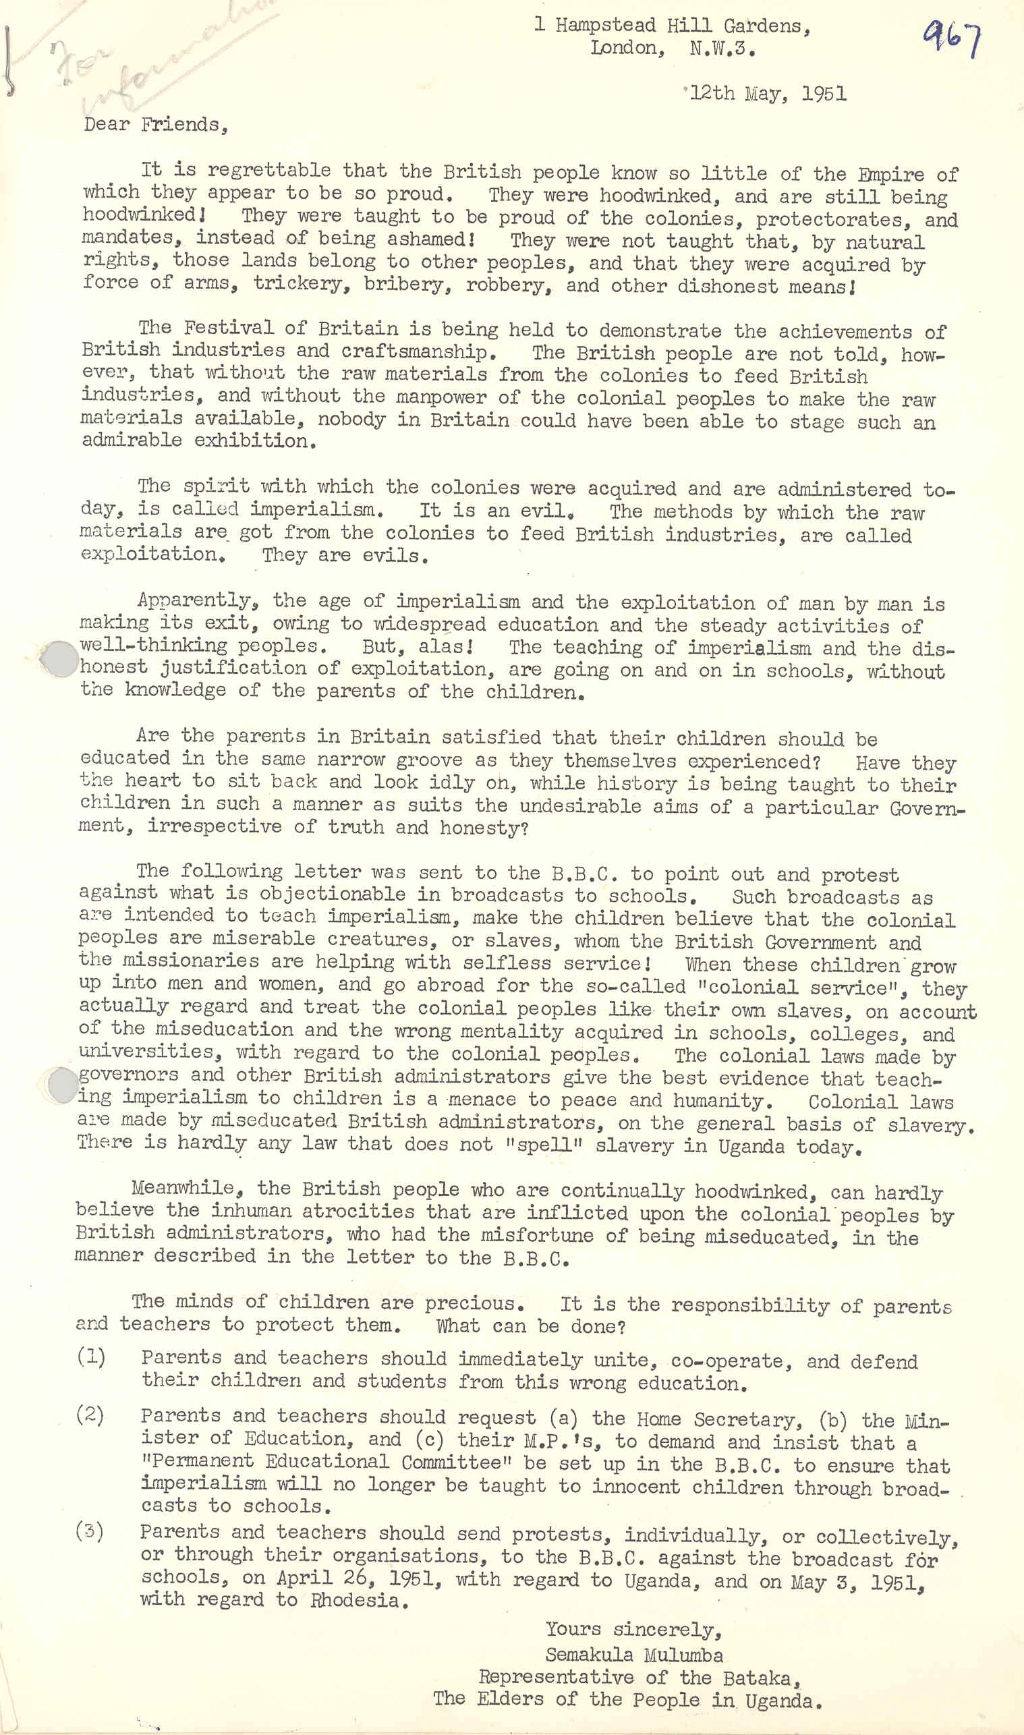 Copy of letter objecting to the celebration of British imperialism, 1951